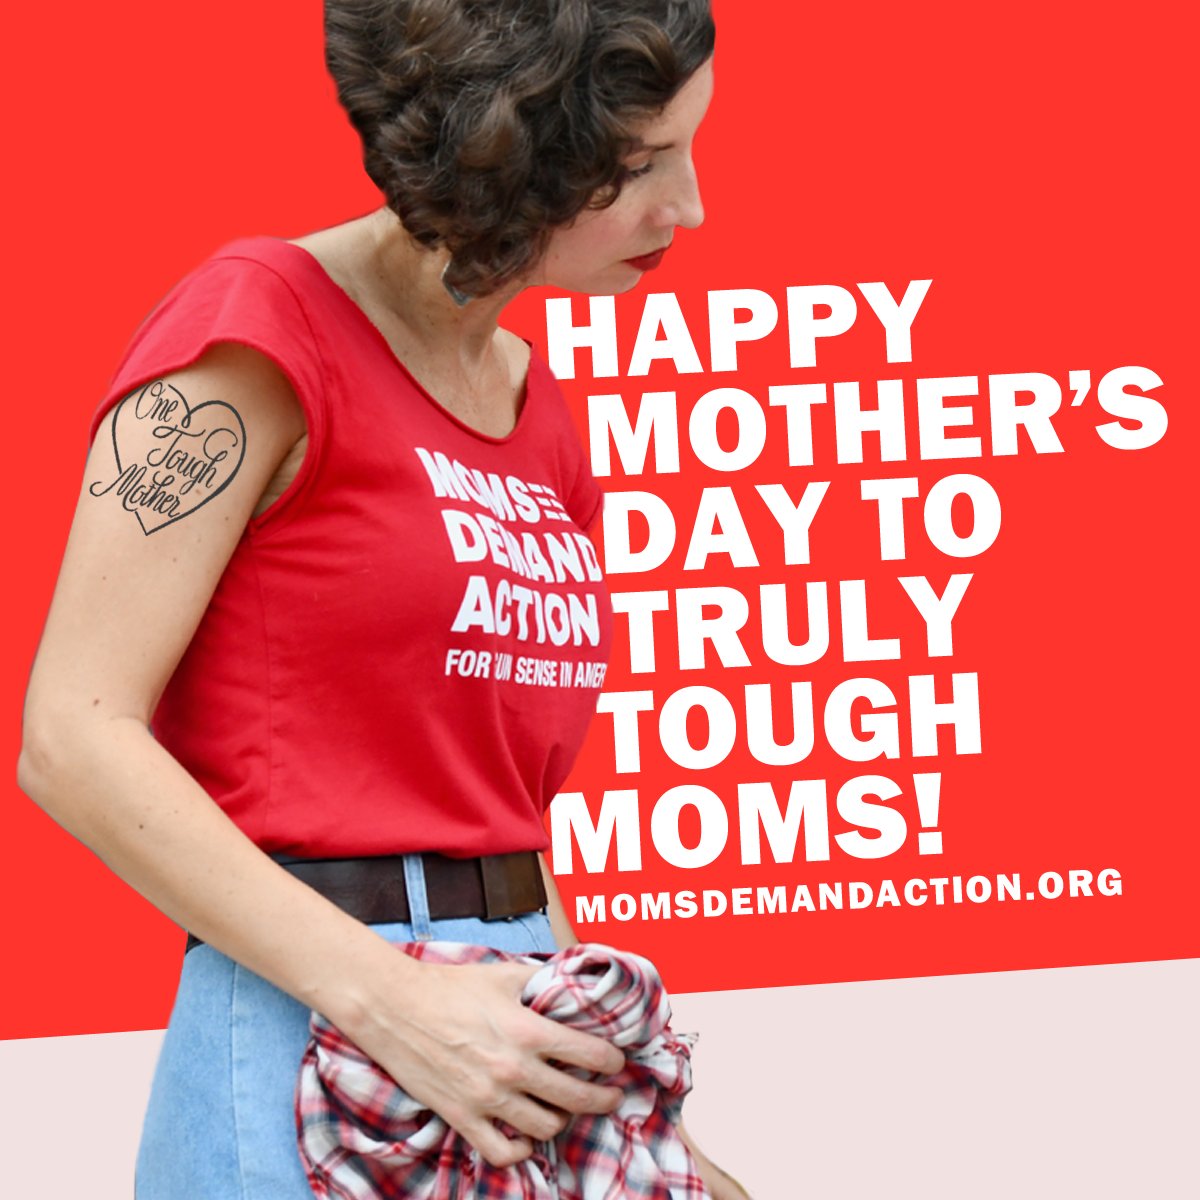 Happy #MothersDay to the moms—and those who play the role of a mom—who do the unglamorous, heavy-lifting of grassroots activism to make our communities safer. You’re tough mothers, indeed!